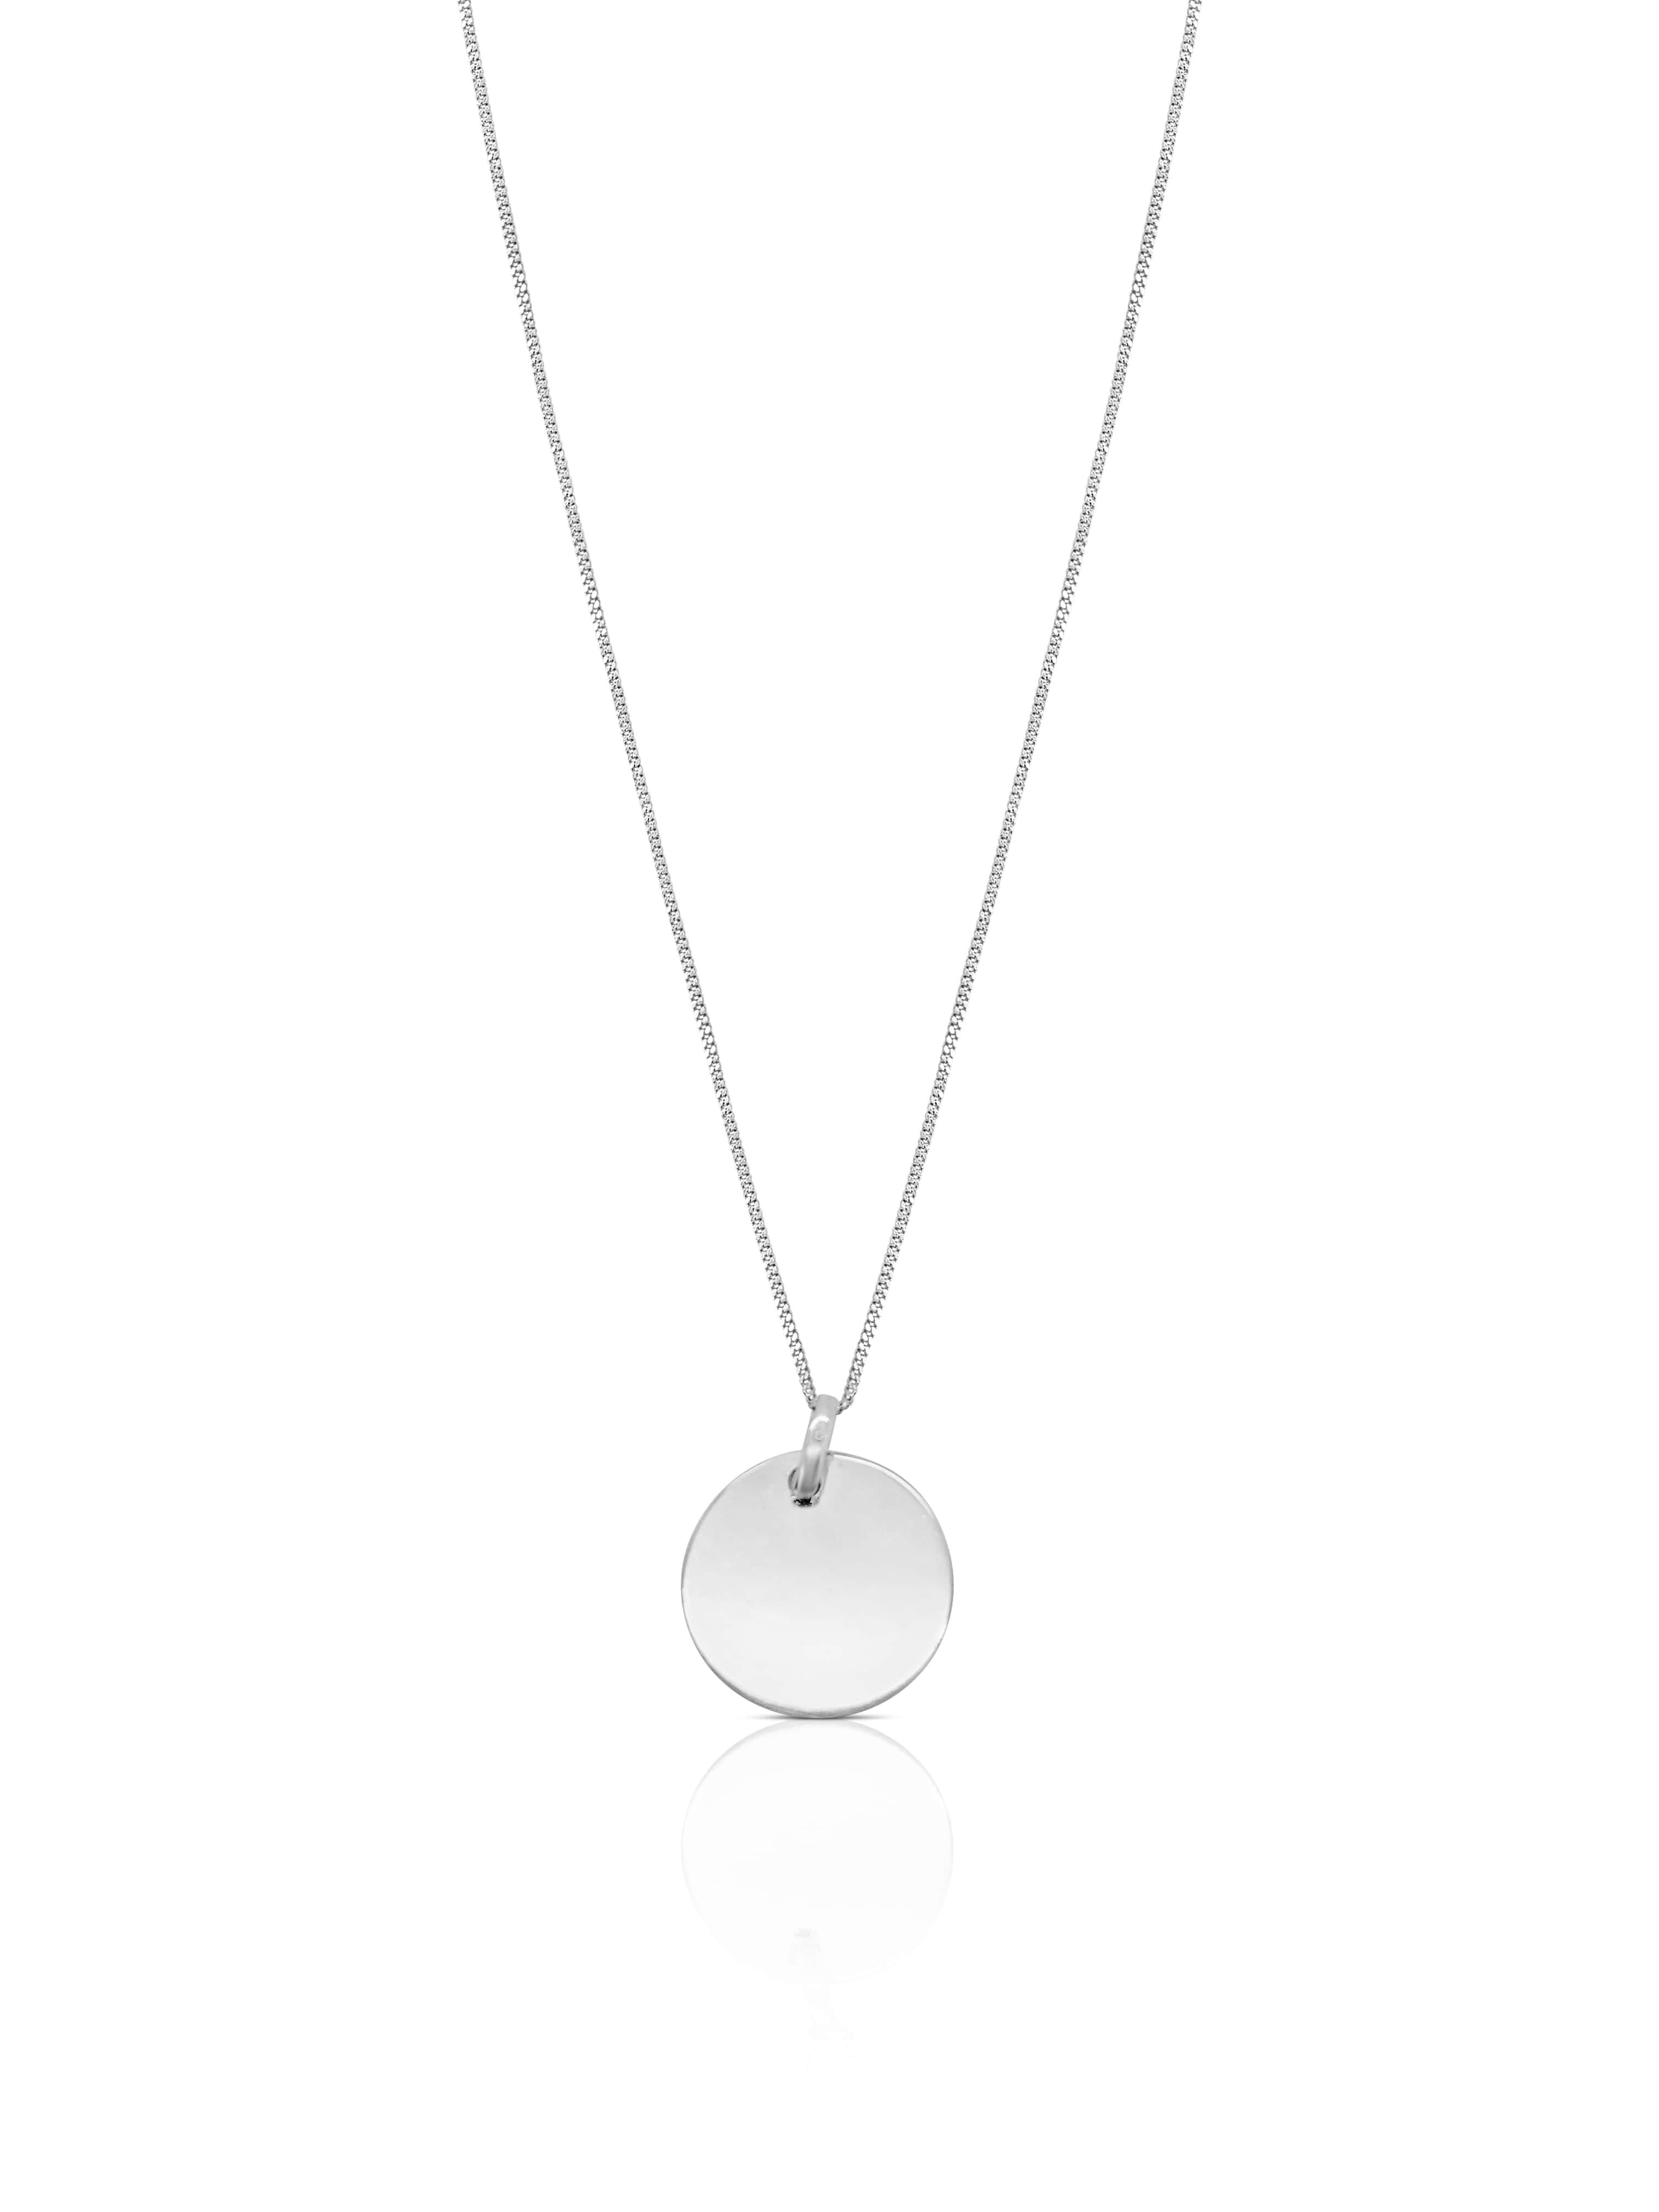 Ór Collection 9ct White Gold Round Disc With Chain - Ór Jewellers